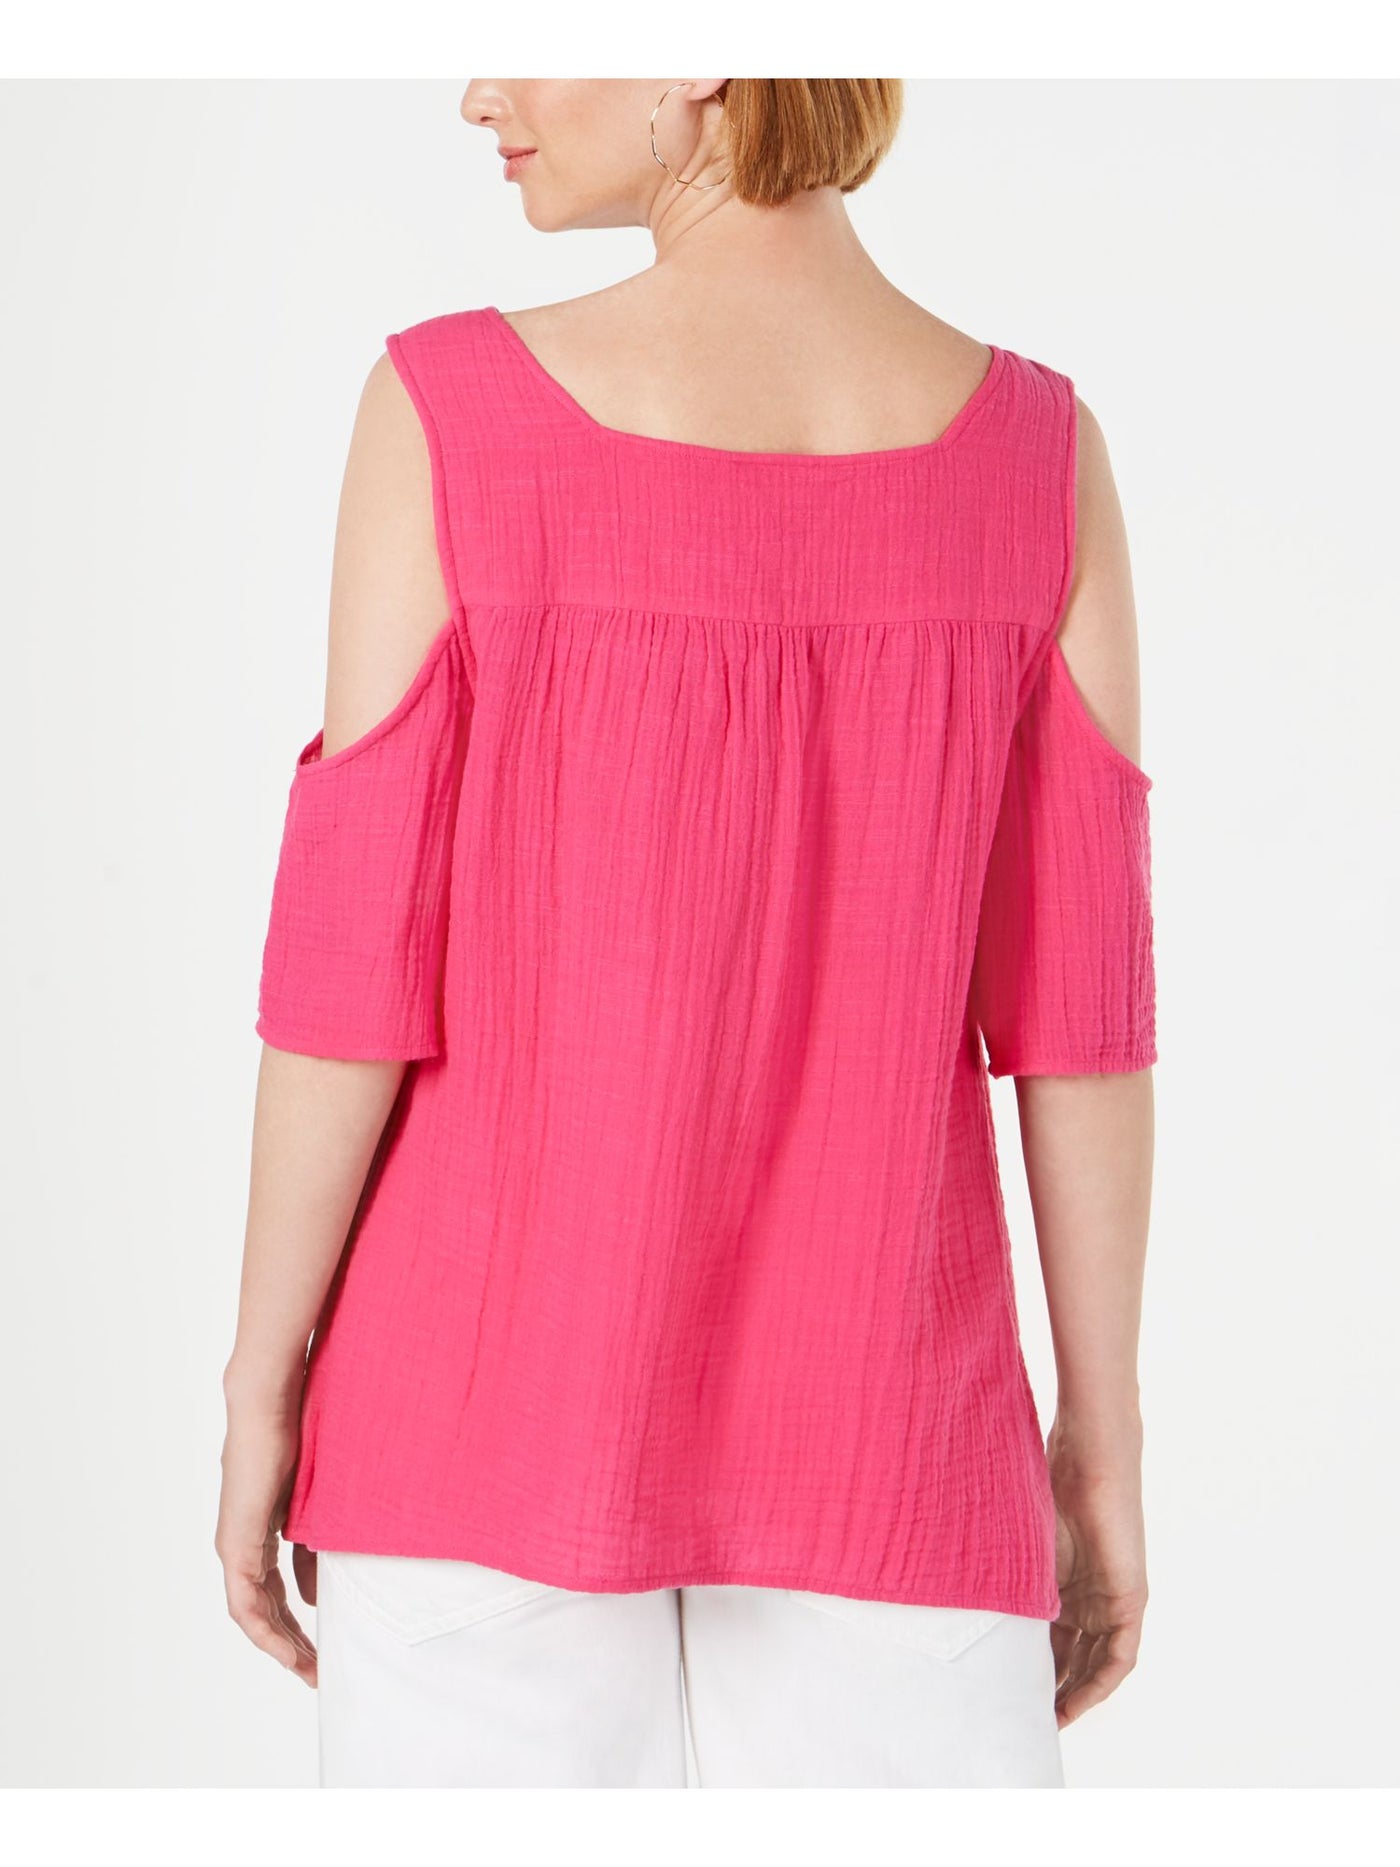 STYLE & COMPANY Womens Pink Short Sleeve Square Neck Top Size: M